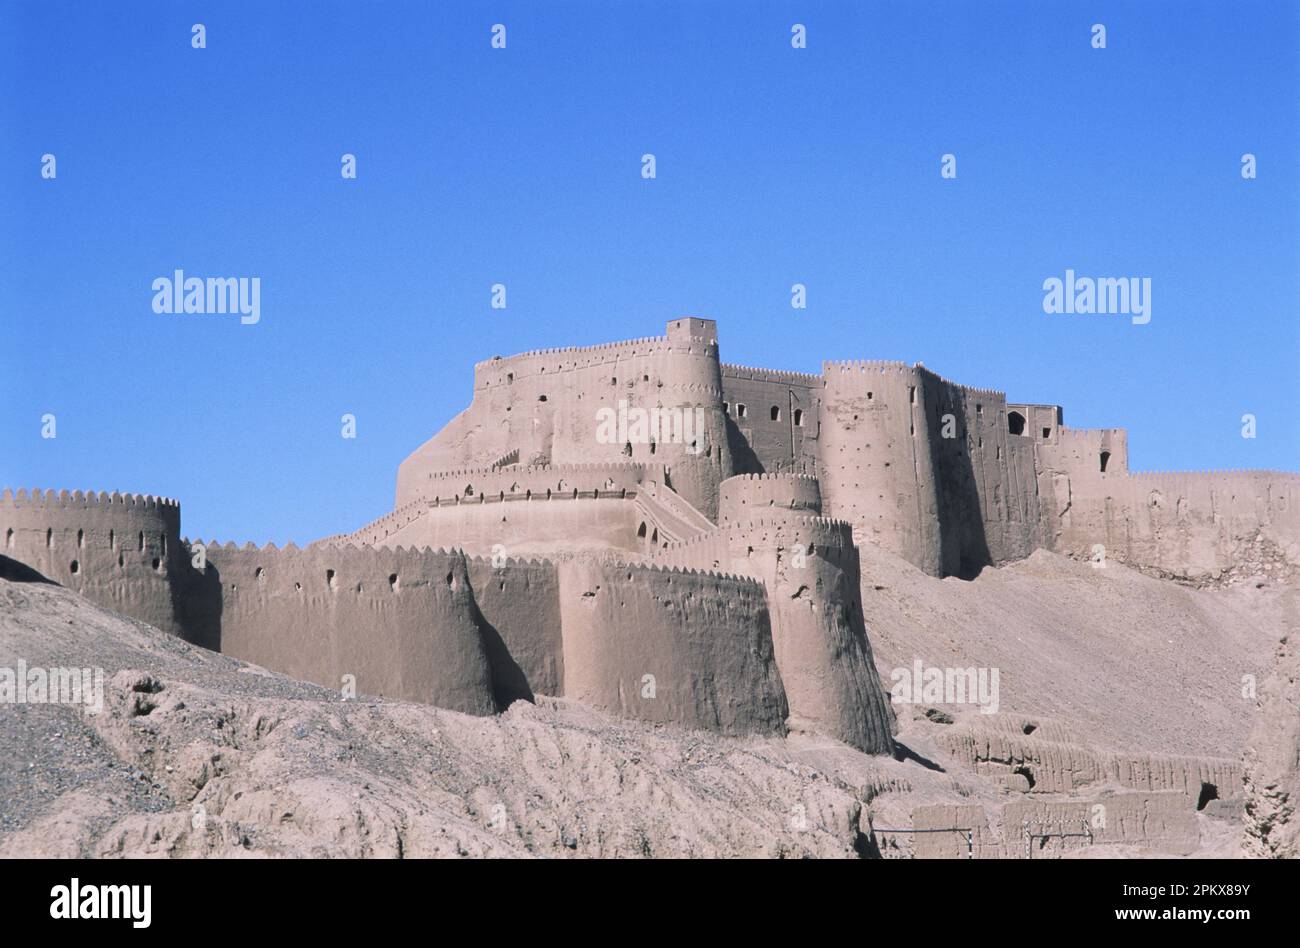 Iran - Bam, Kerman province: the fortress - Arg-e Bam citadel - the world's largest adobe structure - dating to at least 500BC. UNESCO World Heritage Stock Photo